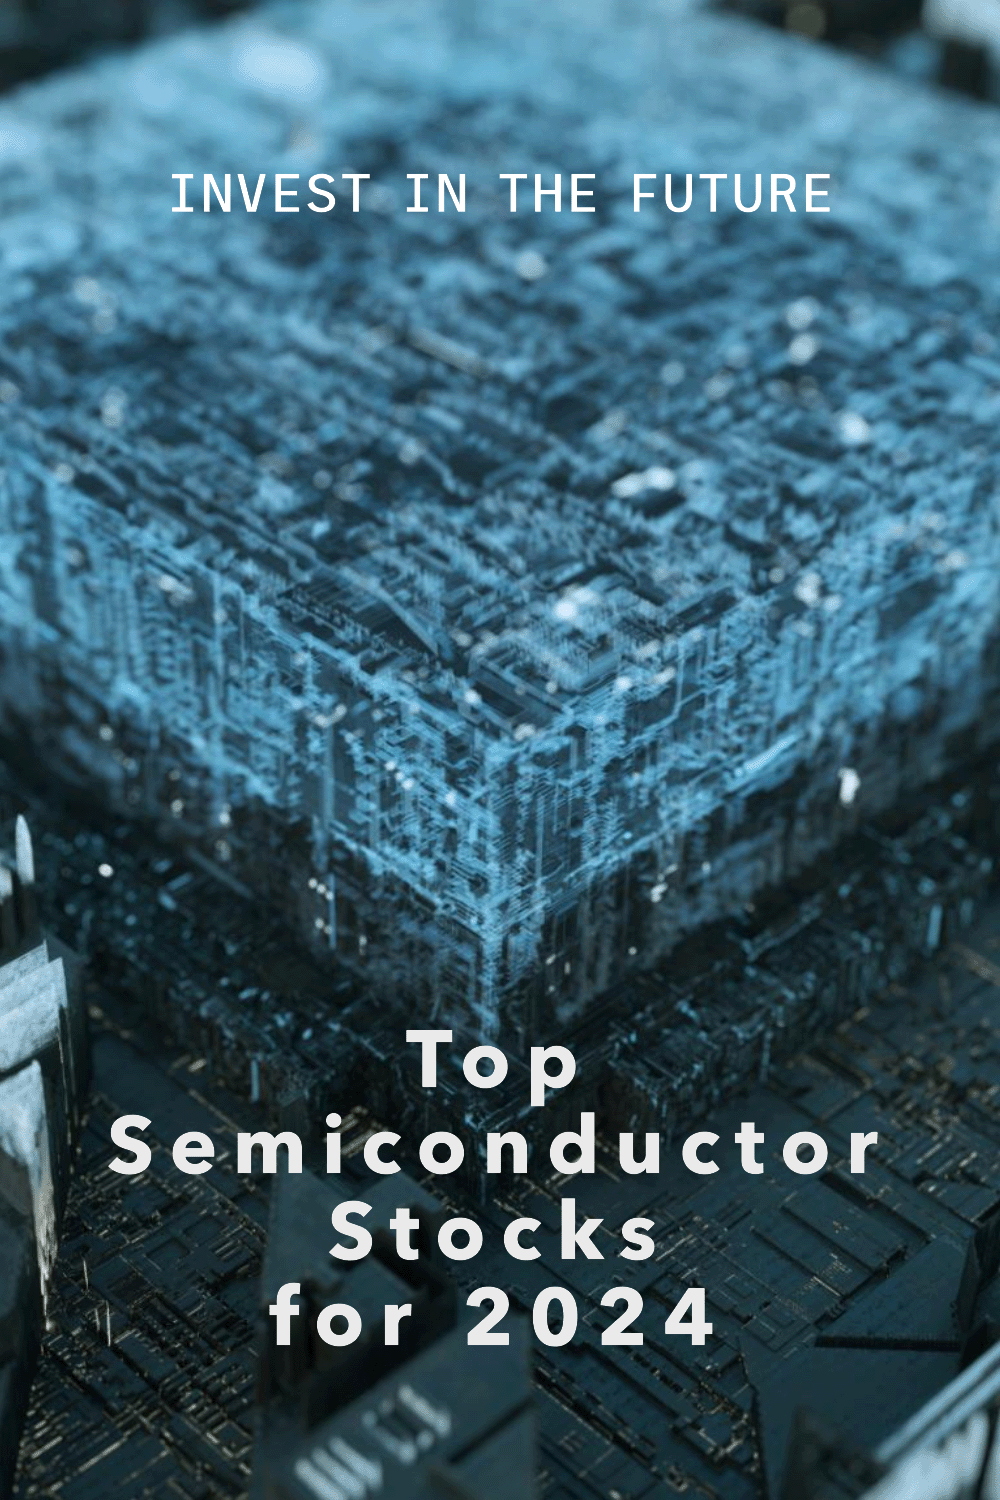 Beyond processors: The best semiconductor stocks for 2024